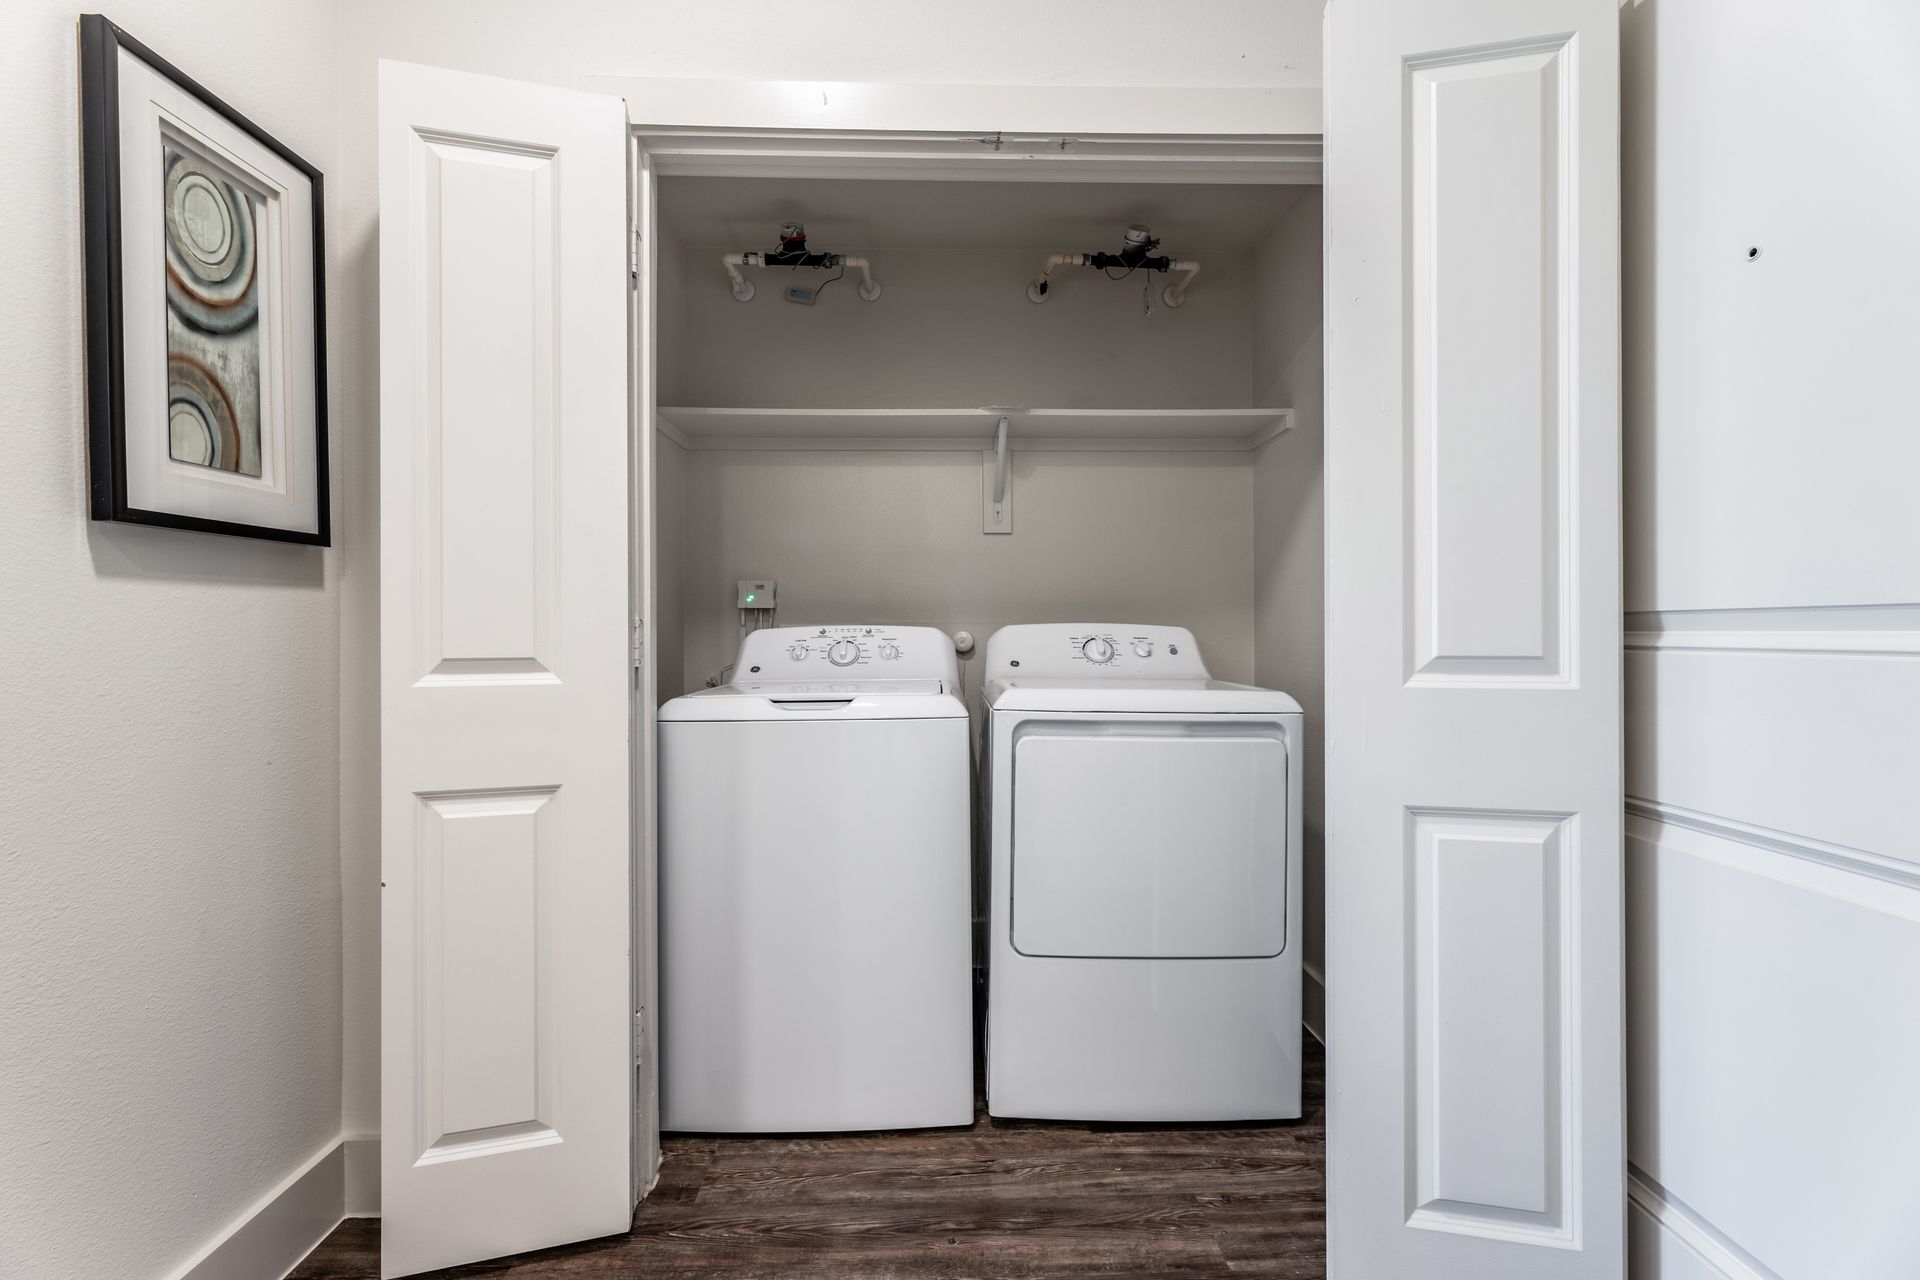 A laundry room with a washer and dryer in a closet at Parkside at Craig Ranch.